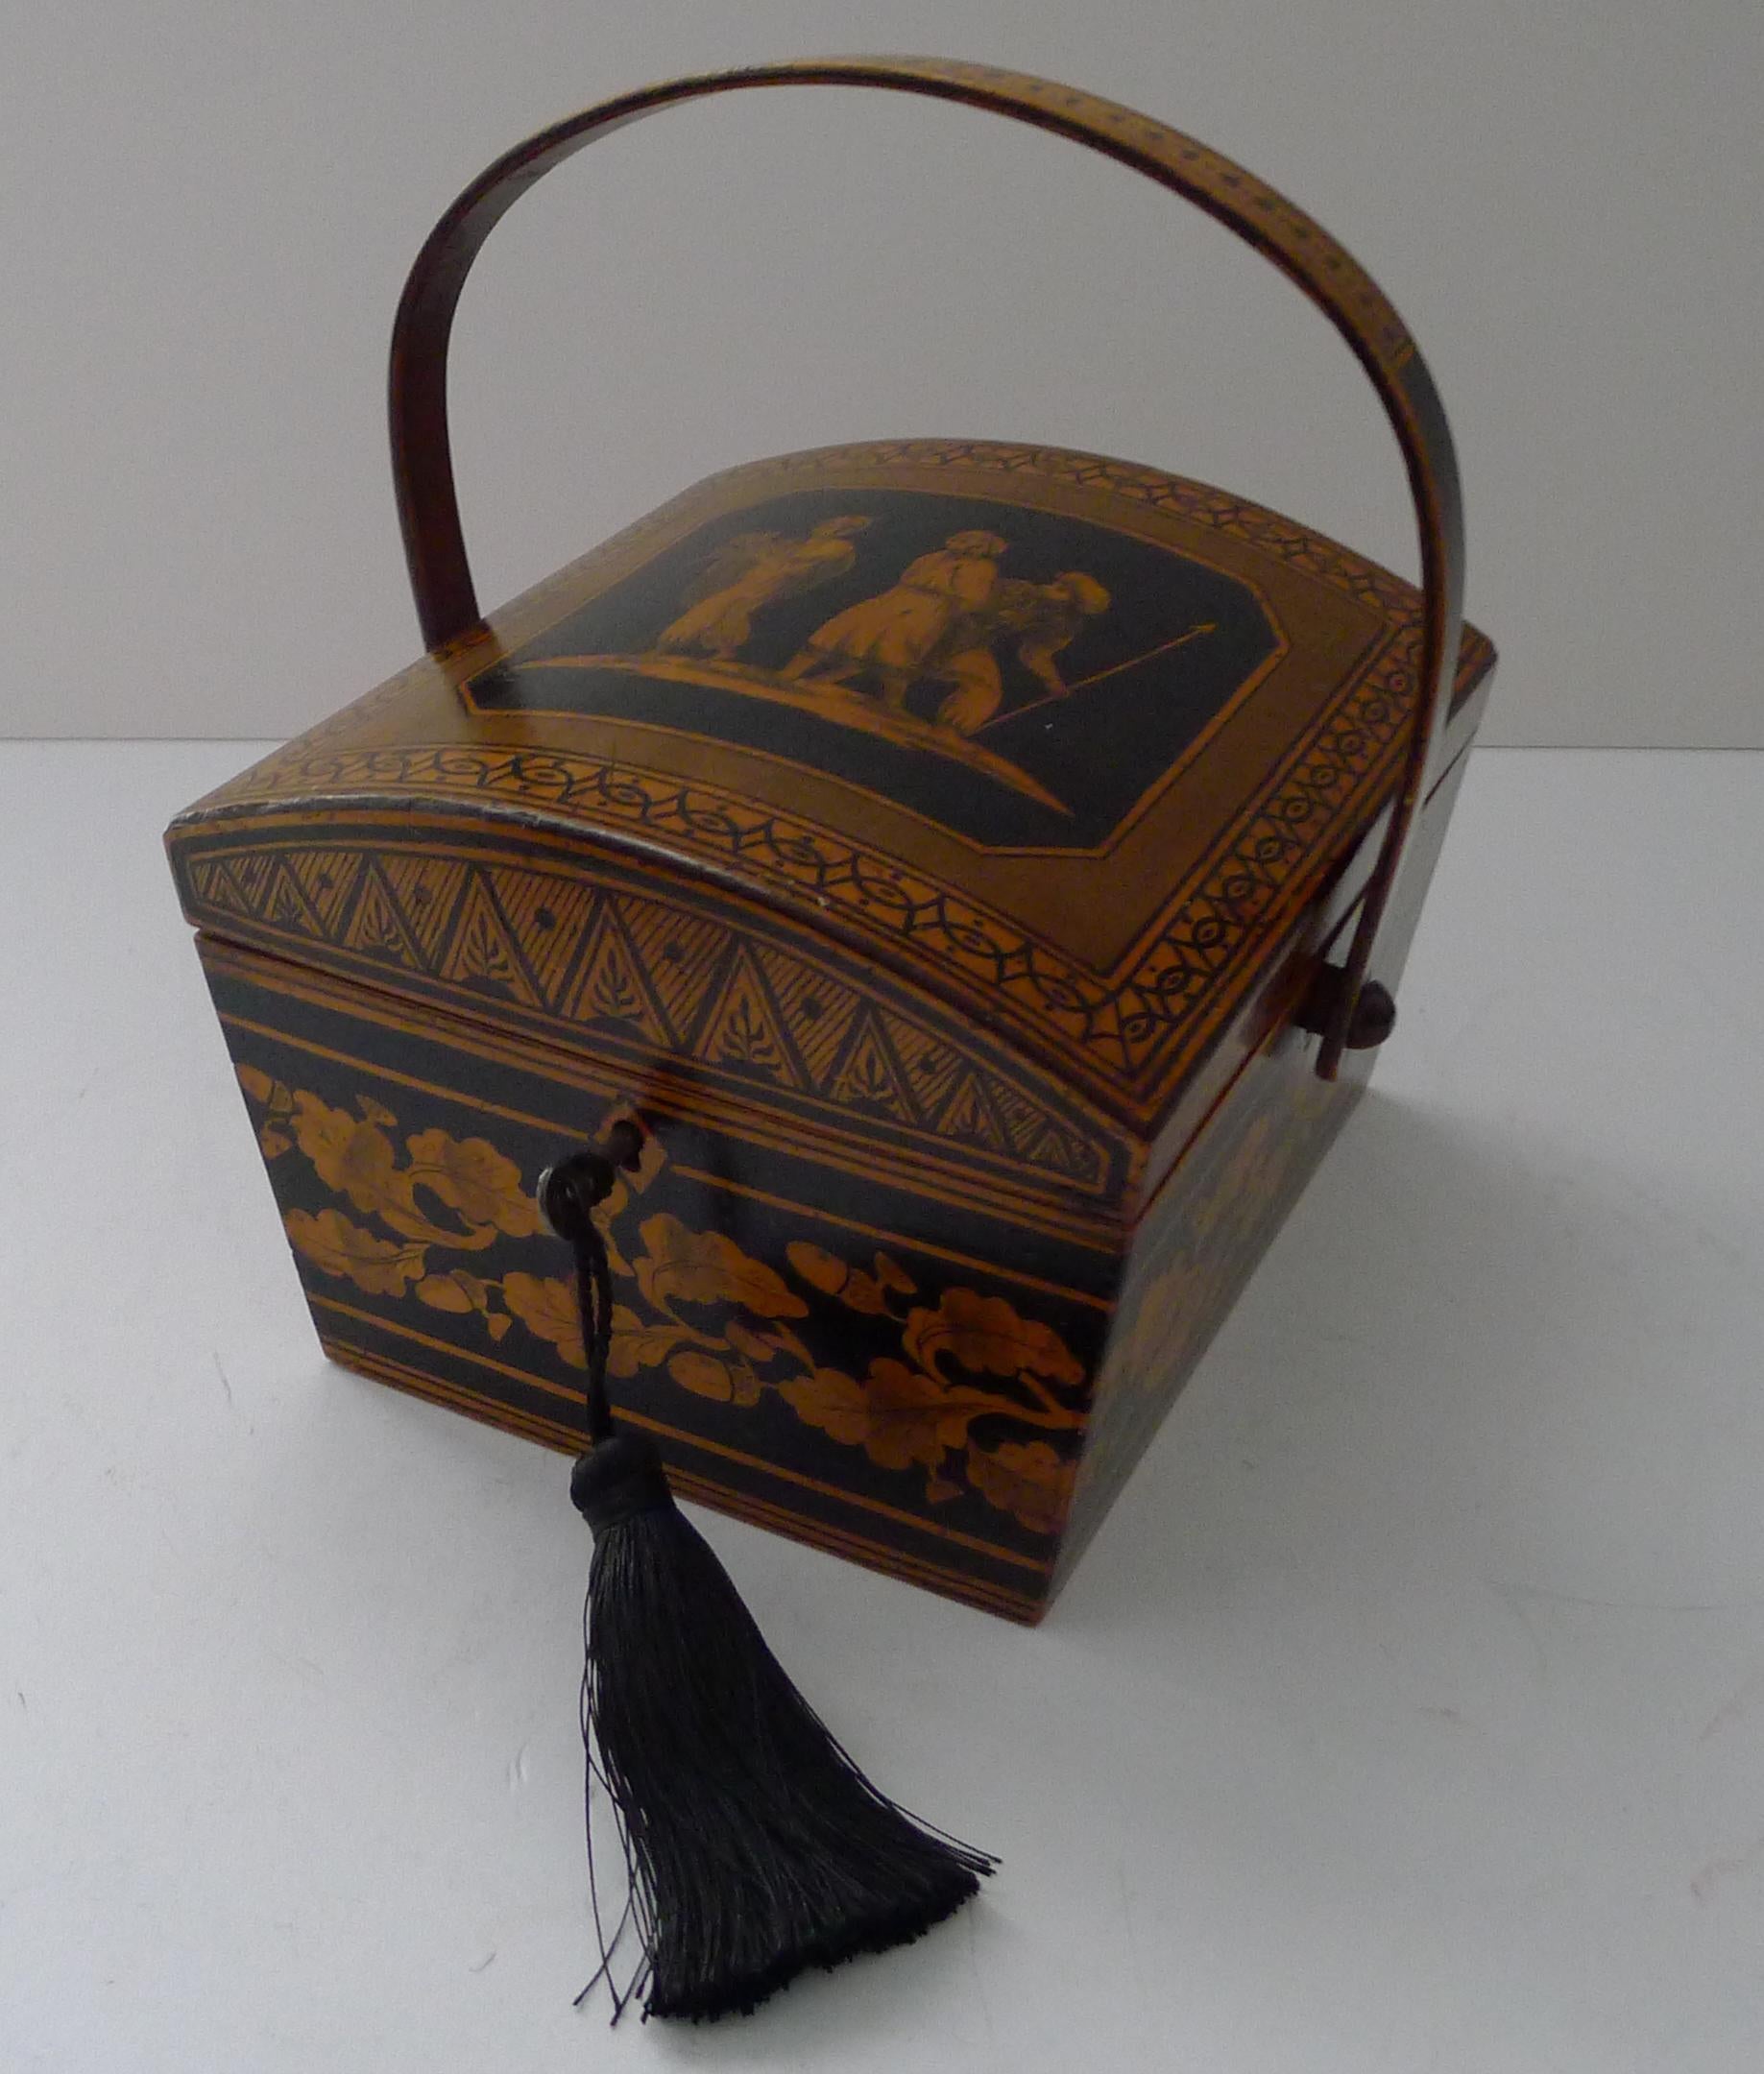 An absolutely charming Regency sewing box in the form of a basket with it's original bentwood folding swing handle.

The domed top features a figural scene with one of the men holding a Crown. The sides are decorated with a very English Oak Leaf and